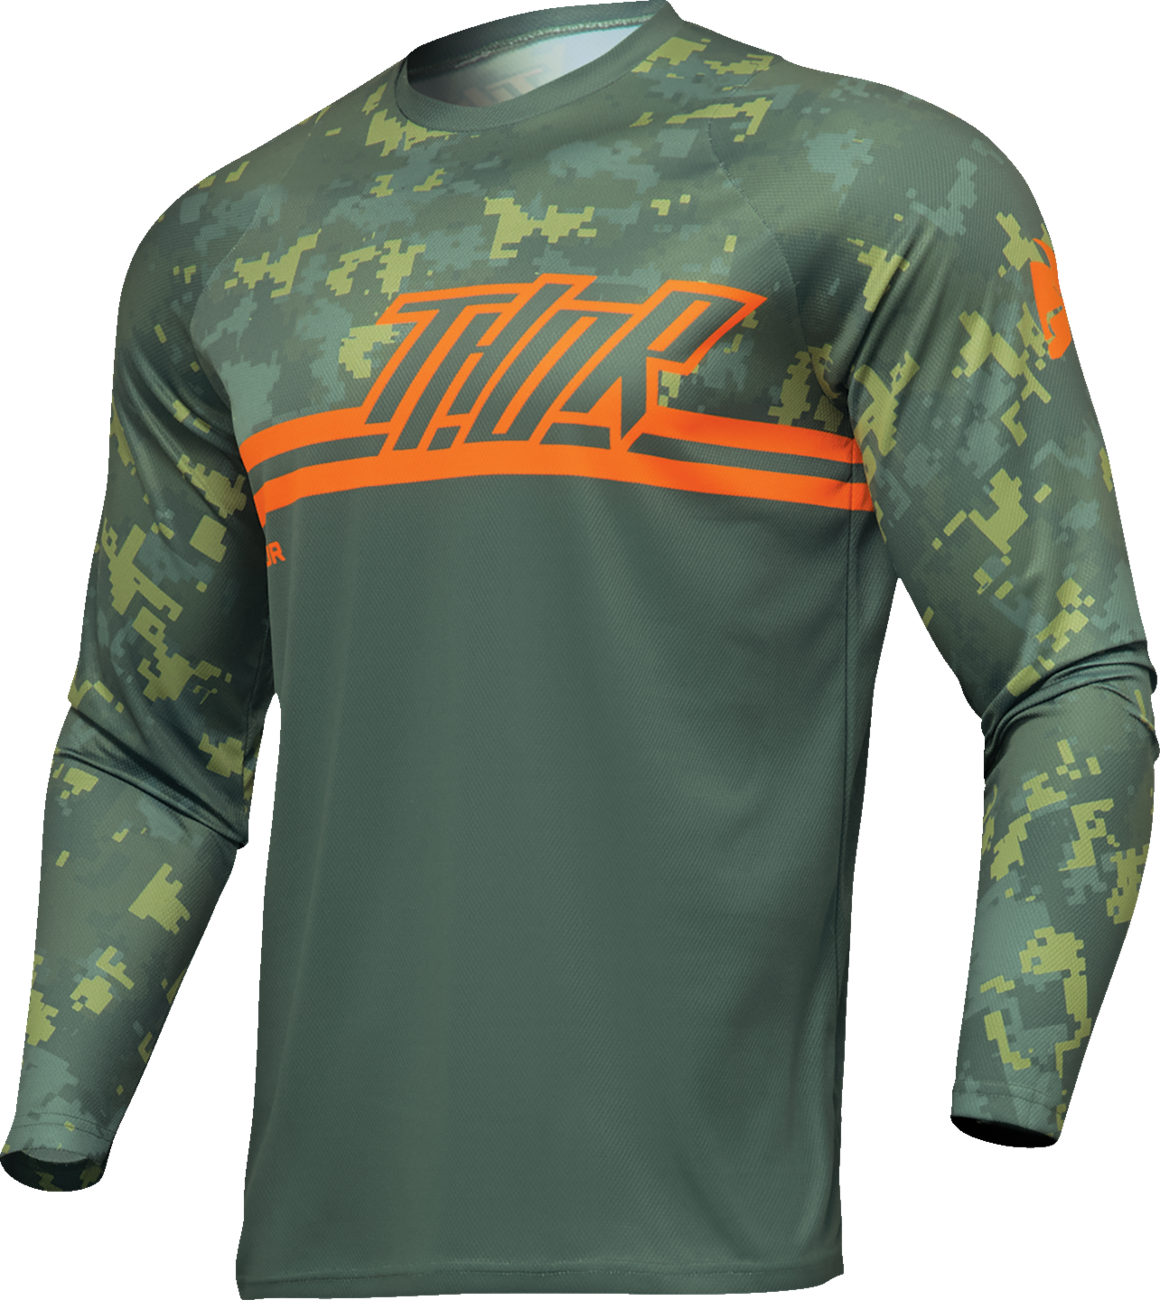 THOR Youth Sector DIGI Jersey - Green - Large 2912-2404